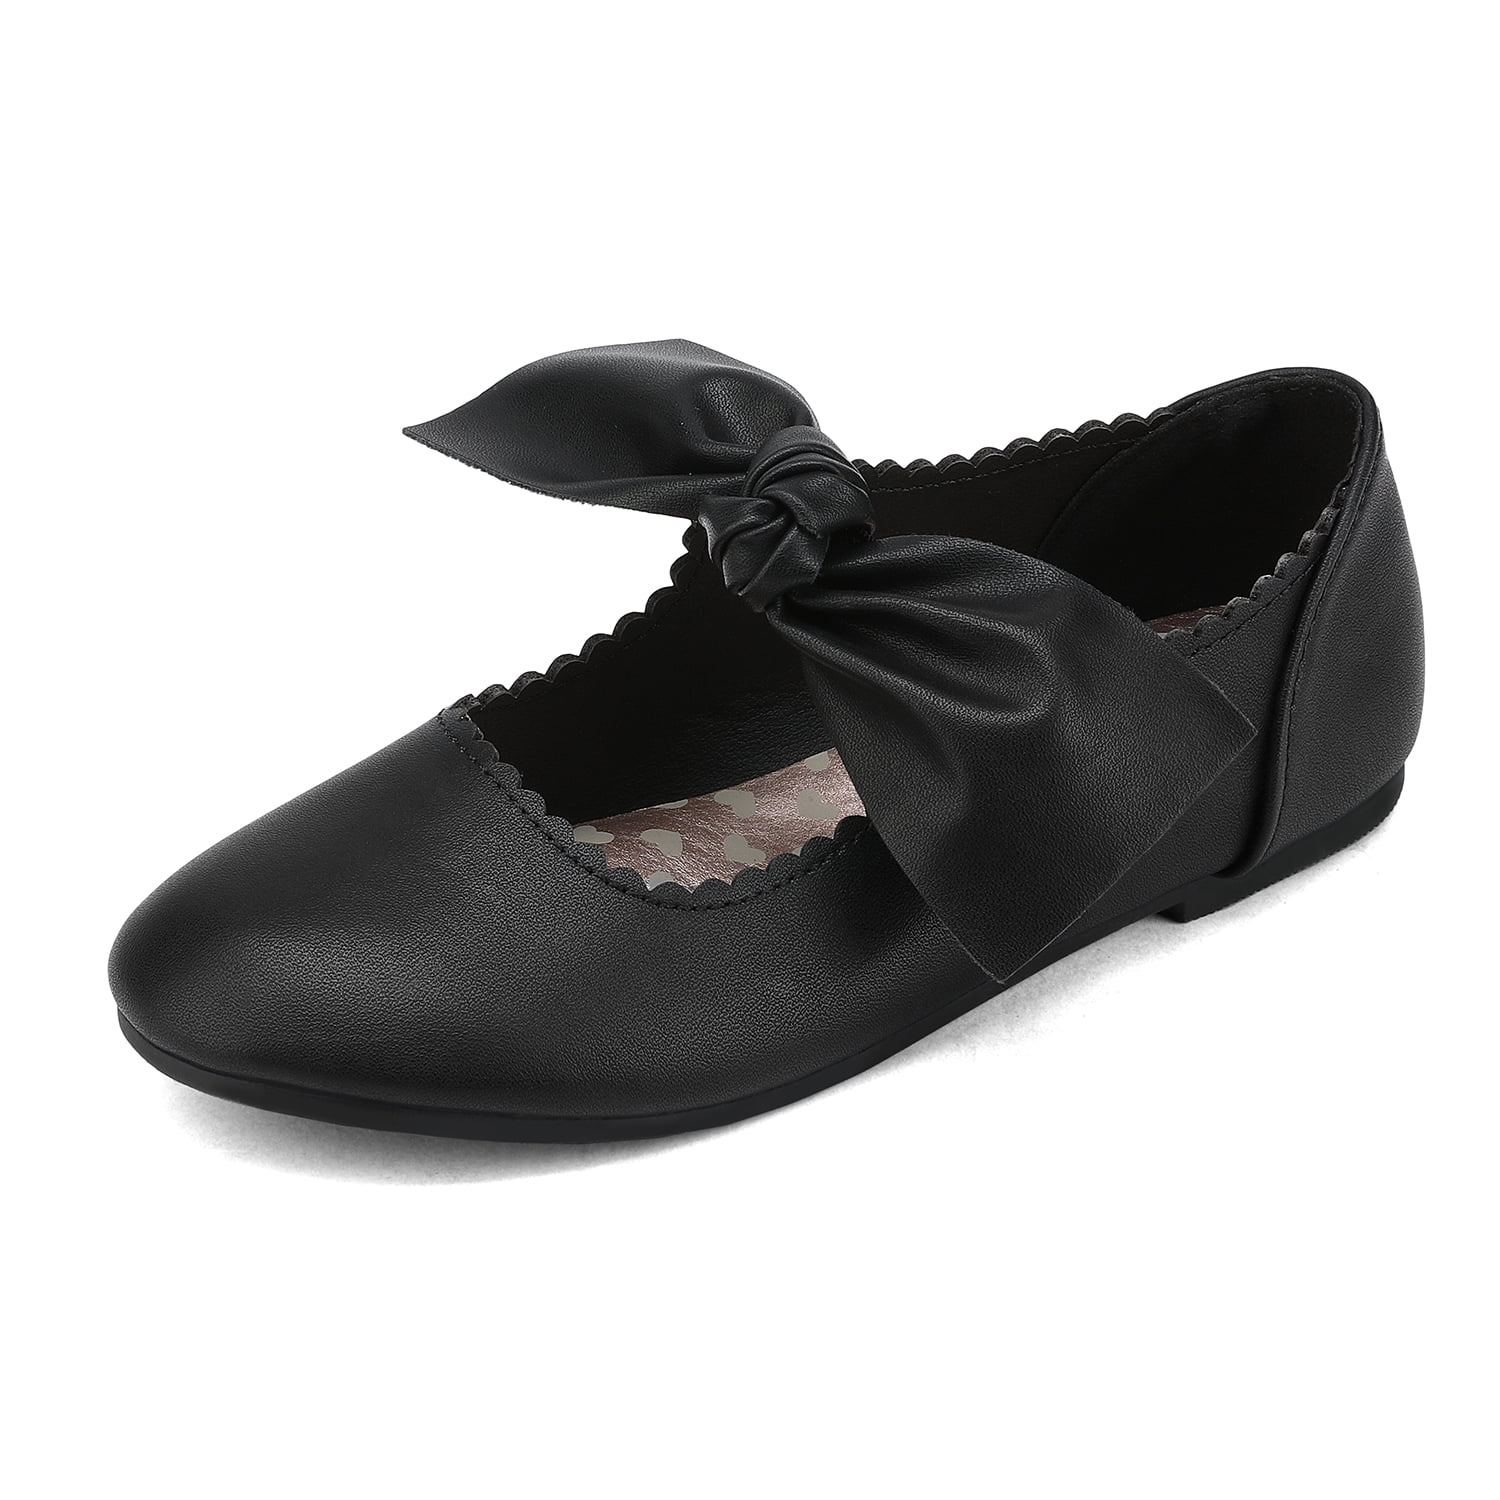 DREAM PAIRS Girls Ballerina Flats Mary Jane Front Bow Dress Shoes 